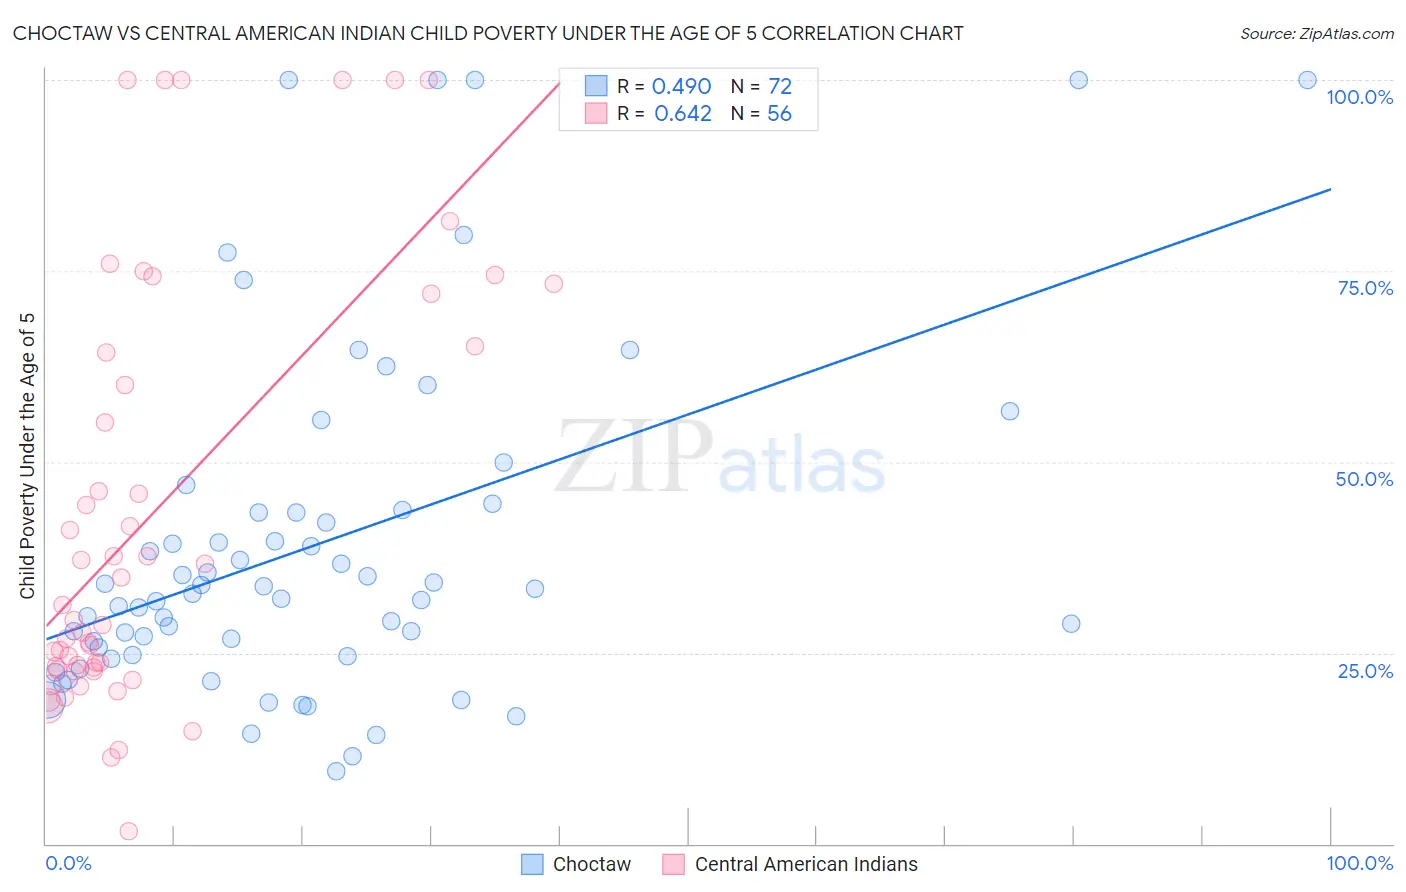 Choctaw vs Central American Indian Child Poverty Under the Age of 5